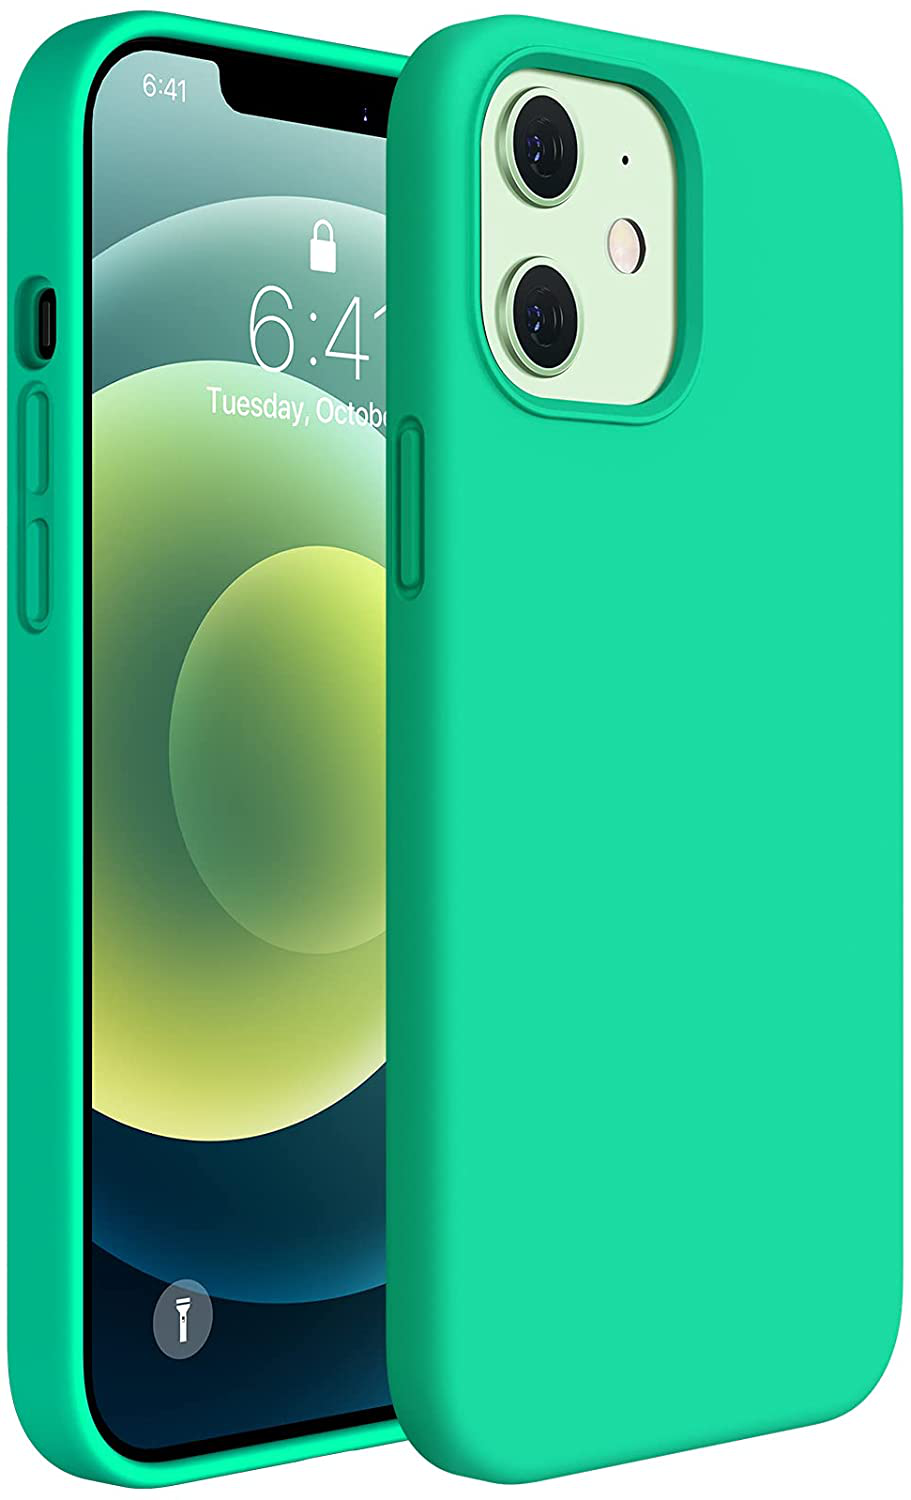 6.1 inch Liquid Silicone Gel Rubber Full Body Protection Shockproof Drop Protection Case Compatible with iPhone 12 Case and iPhone 12 Pro Case 6.1